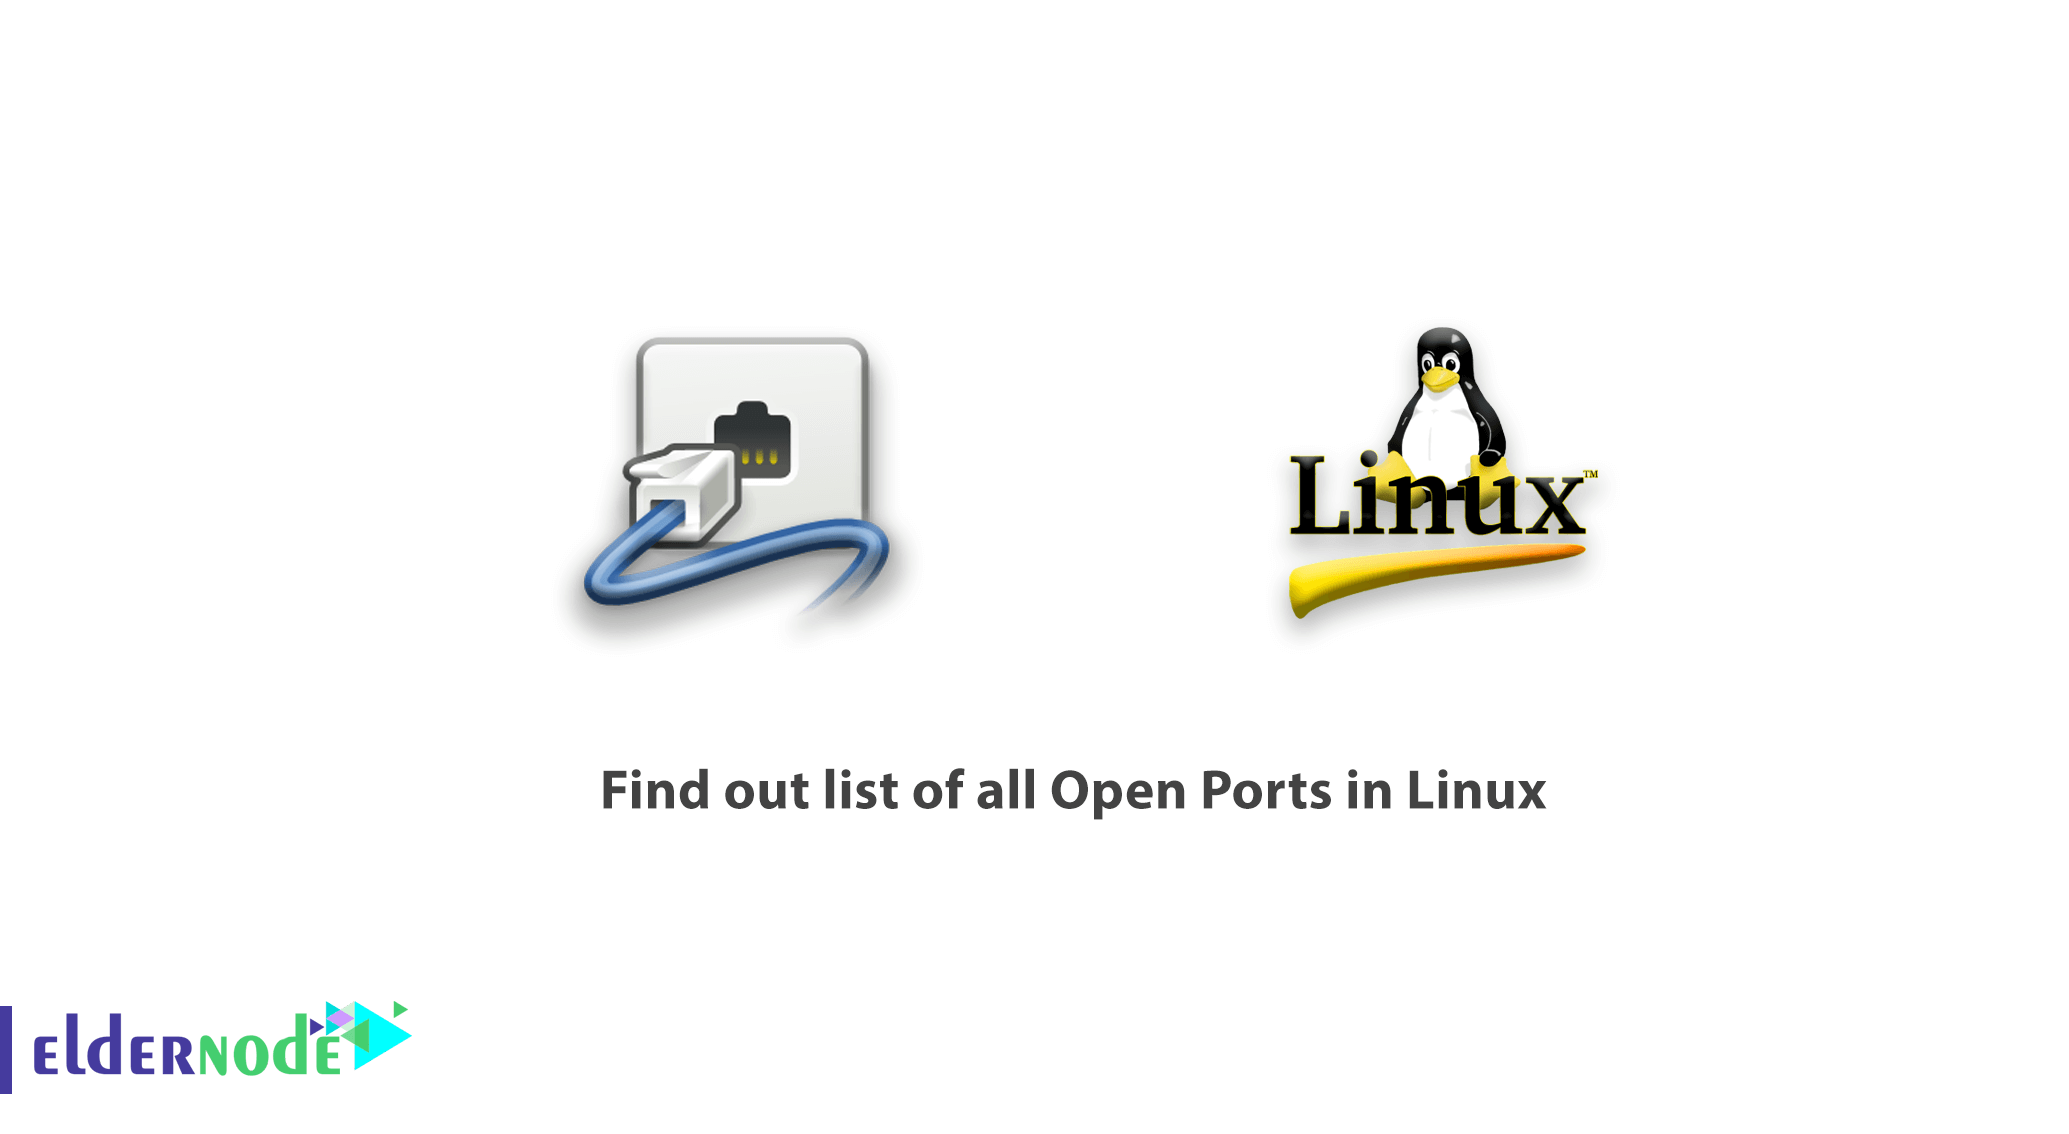 Find out list of all Open Ports in Linux